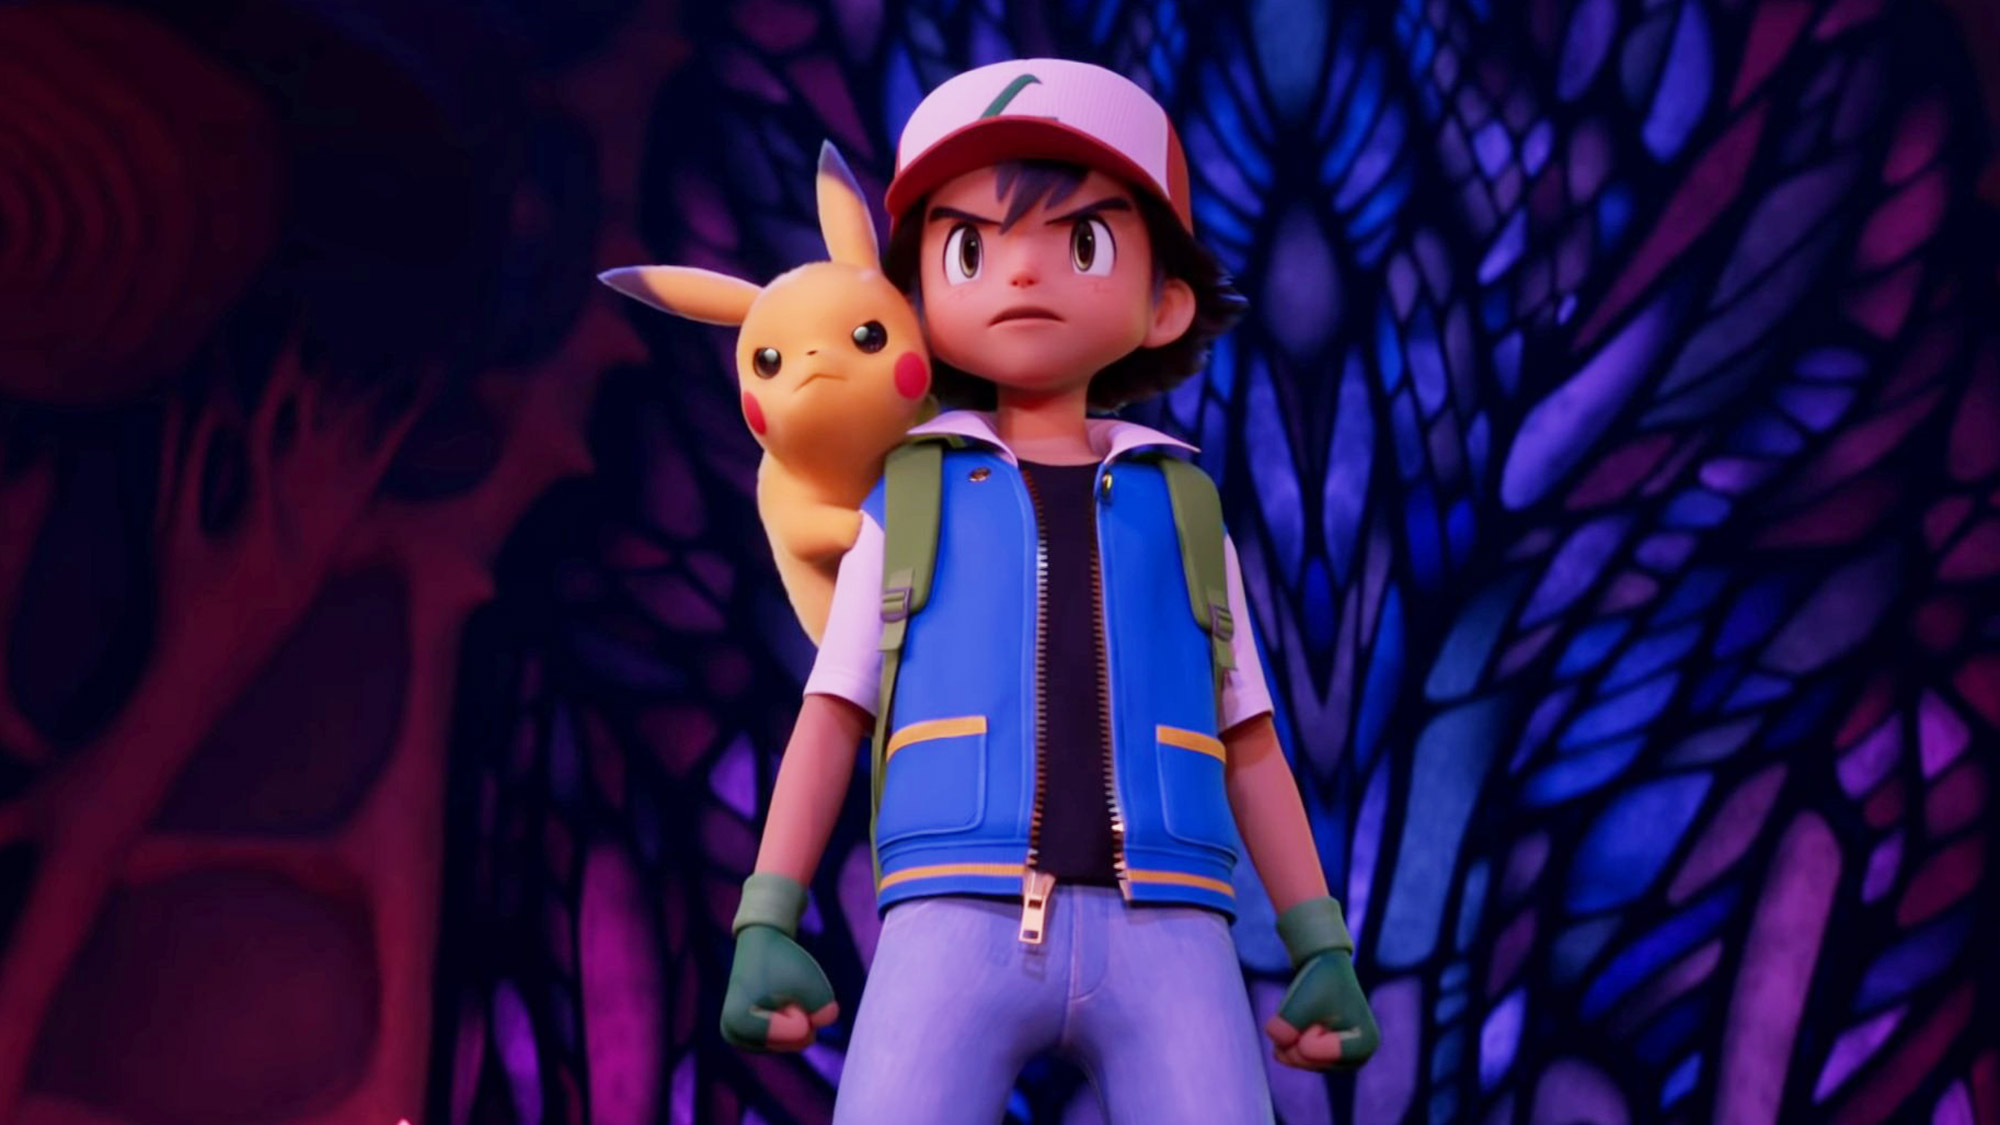 Pikachu on Ash's shoulder in pokemon mewtwo strikes back evolution, one of the Best family movies on Netflix